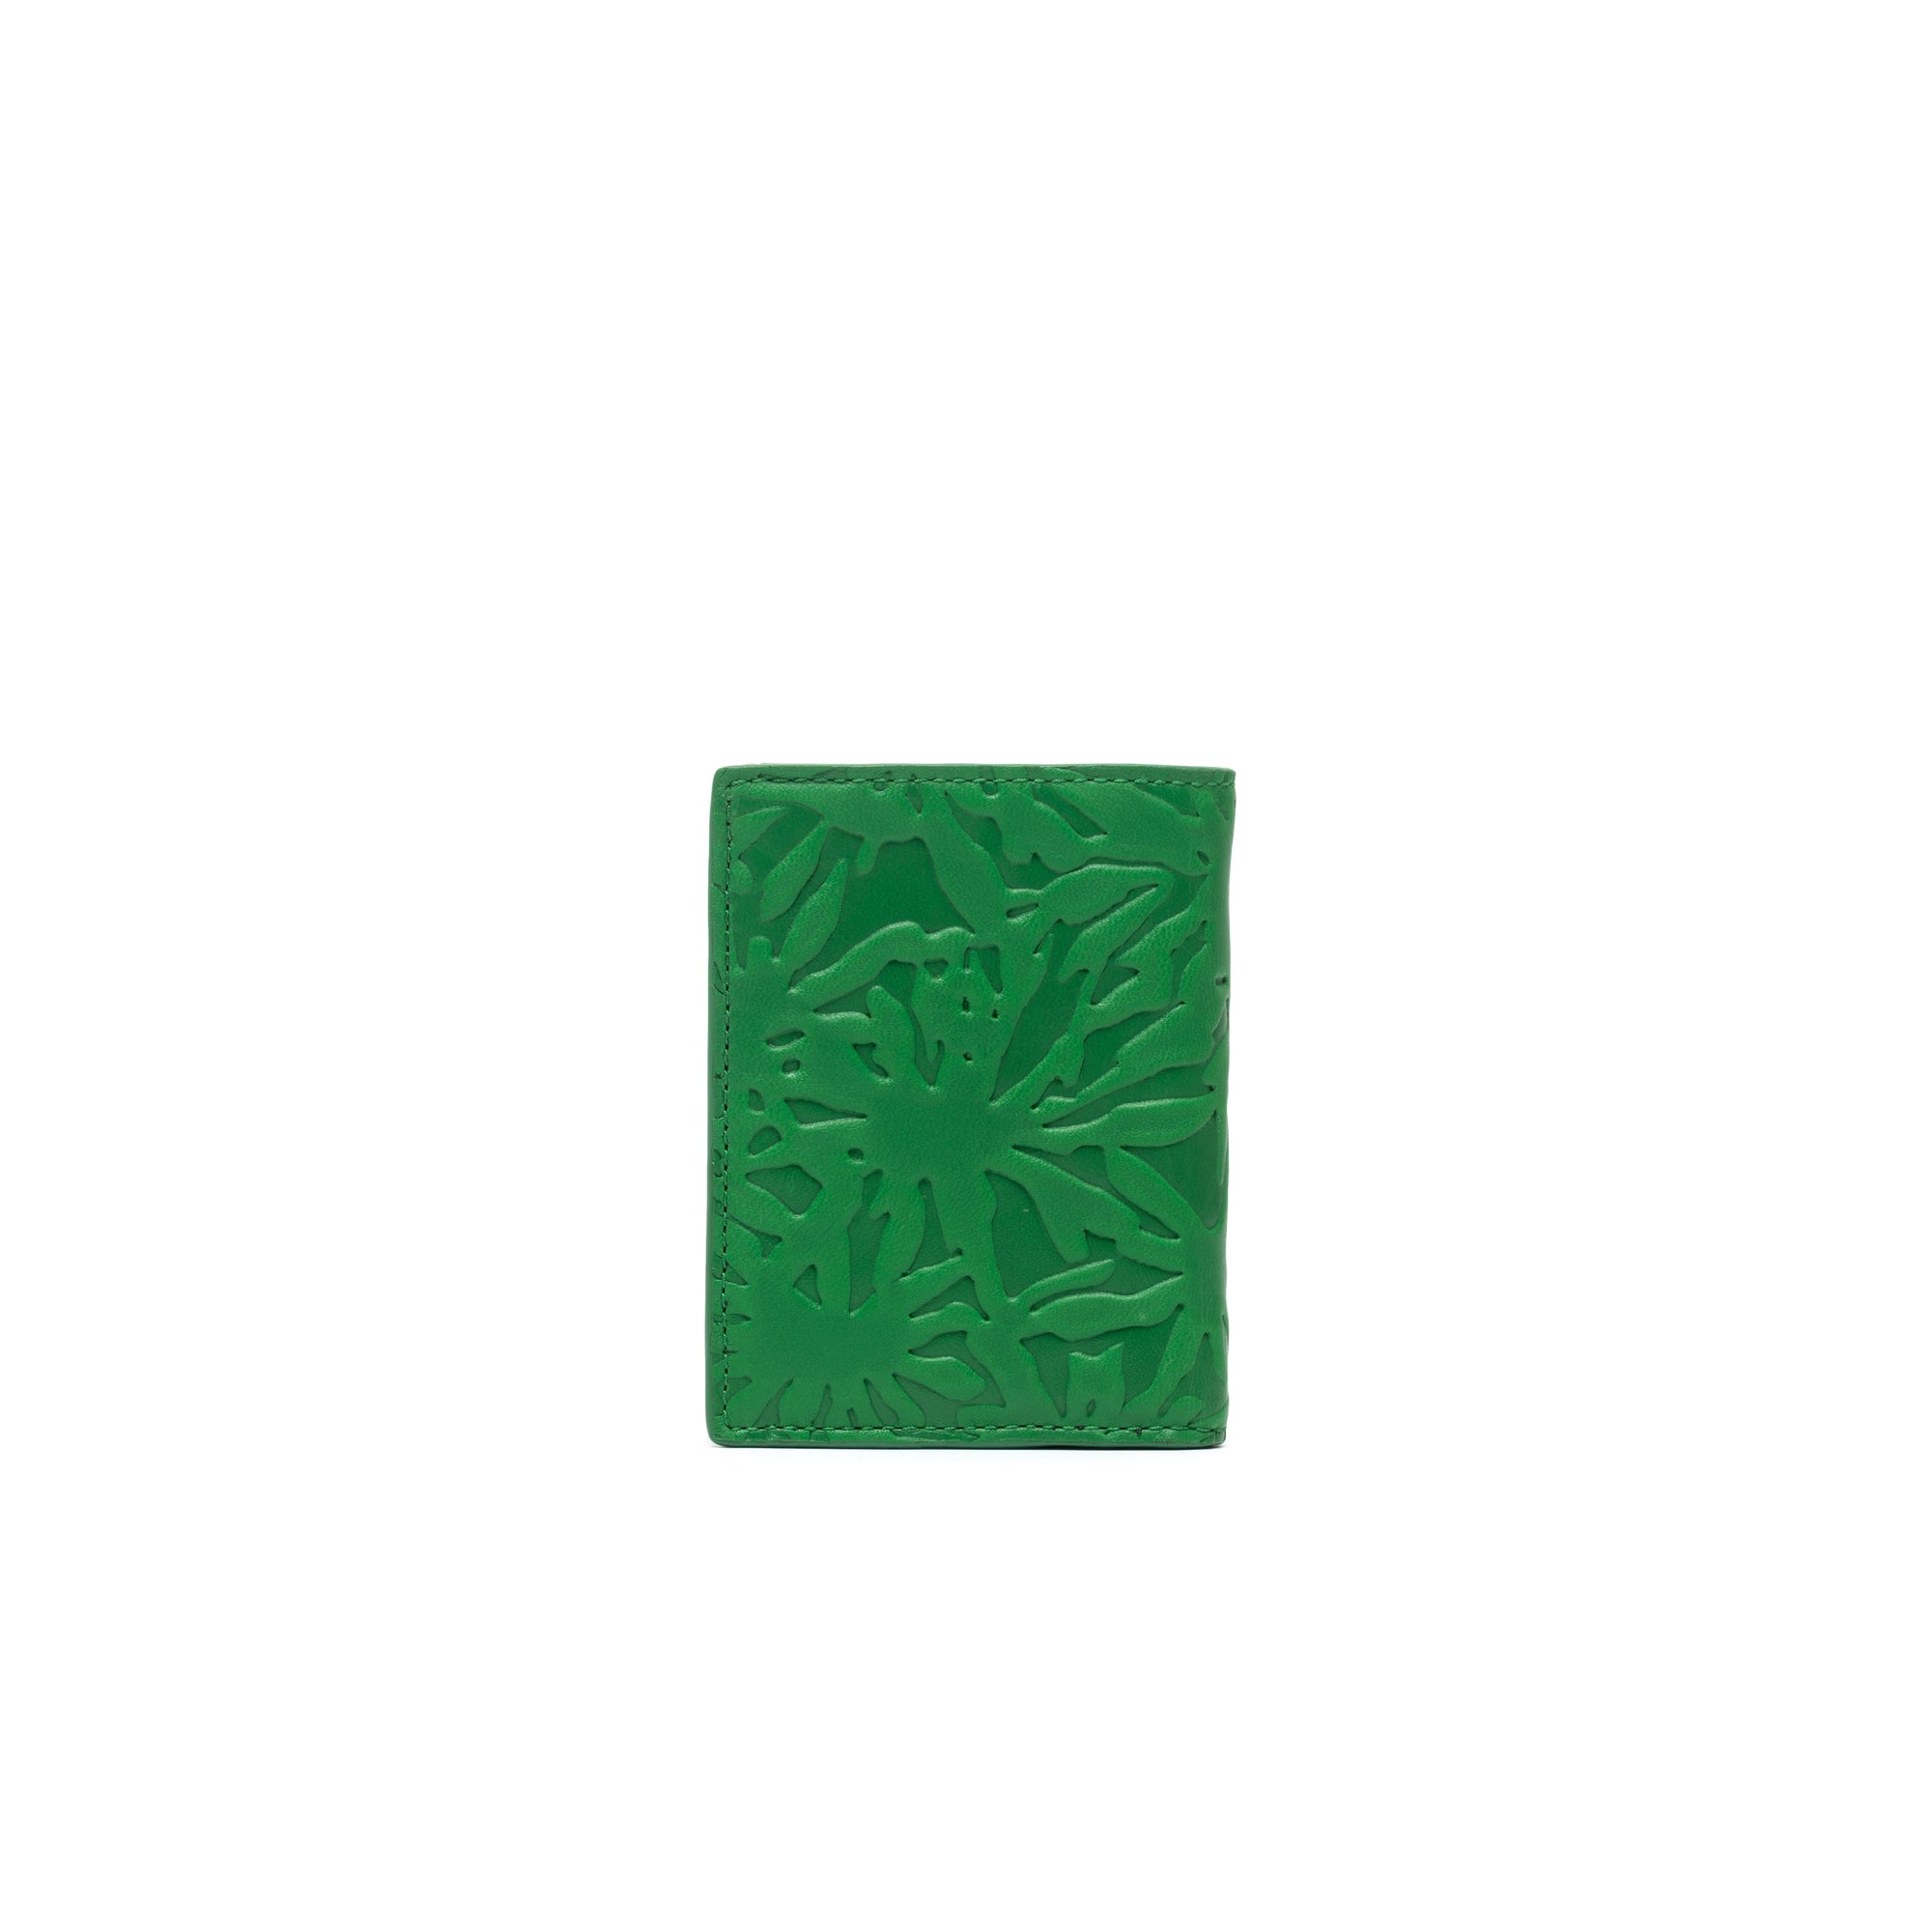 CDG WALLET - Embossed Forest (SA0641 Green) view 2